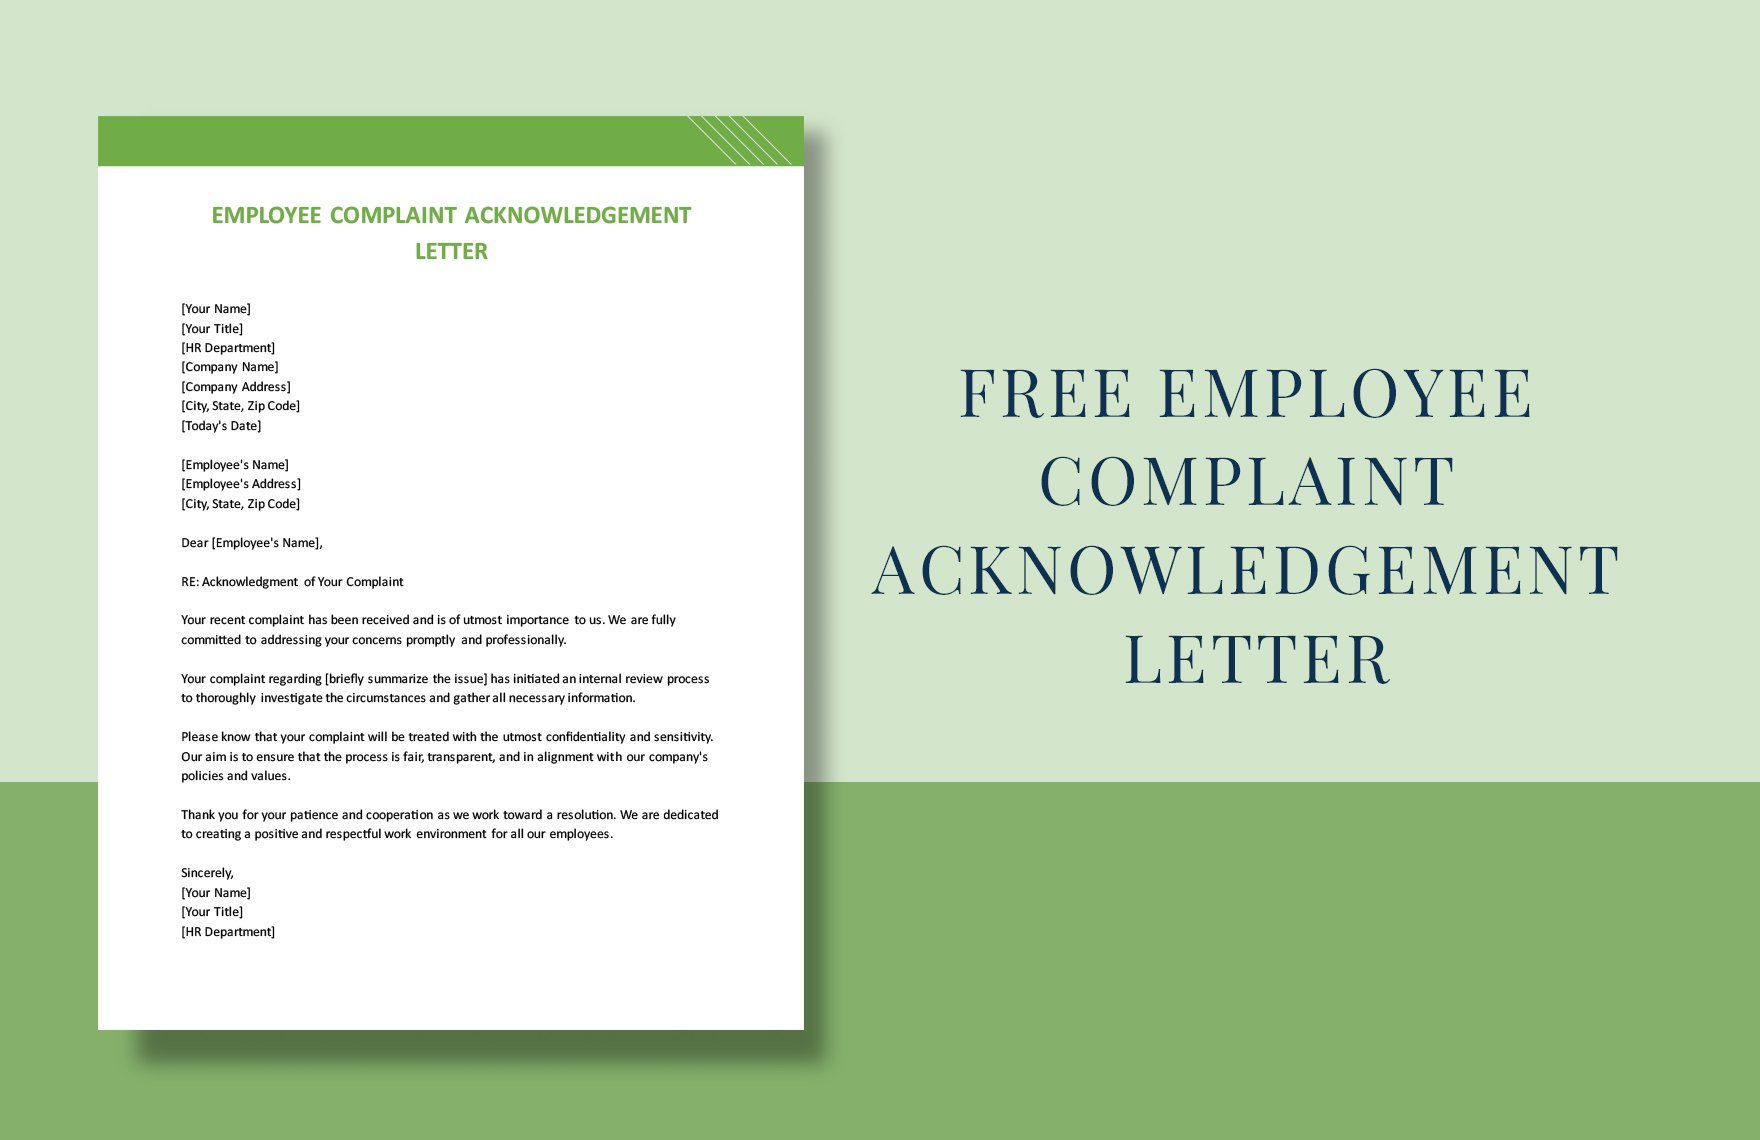 Employee Complaint Acknowledgement Letter in Word, Google Docs, PDF